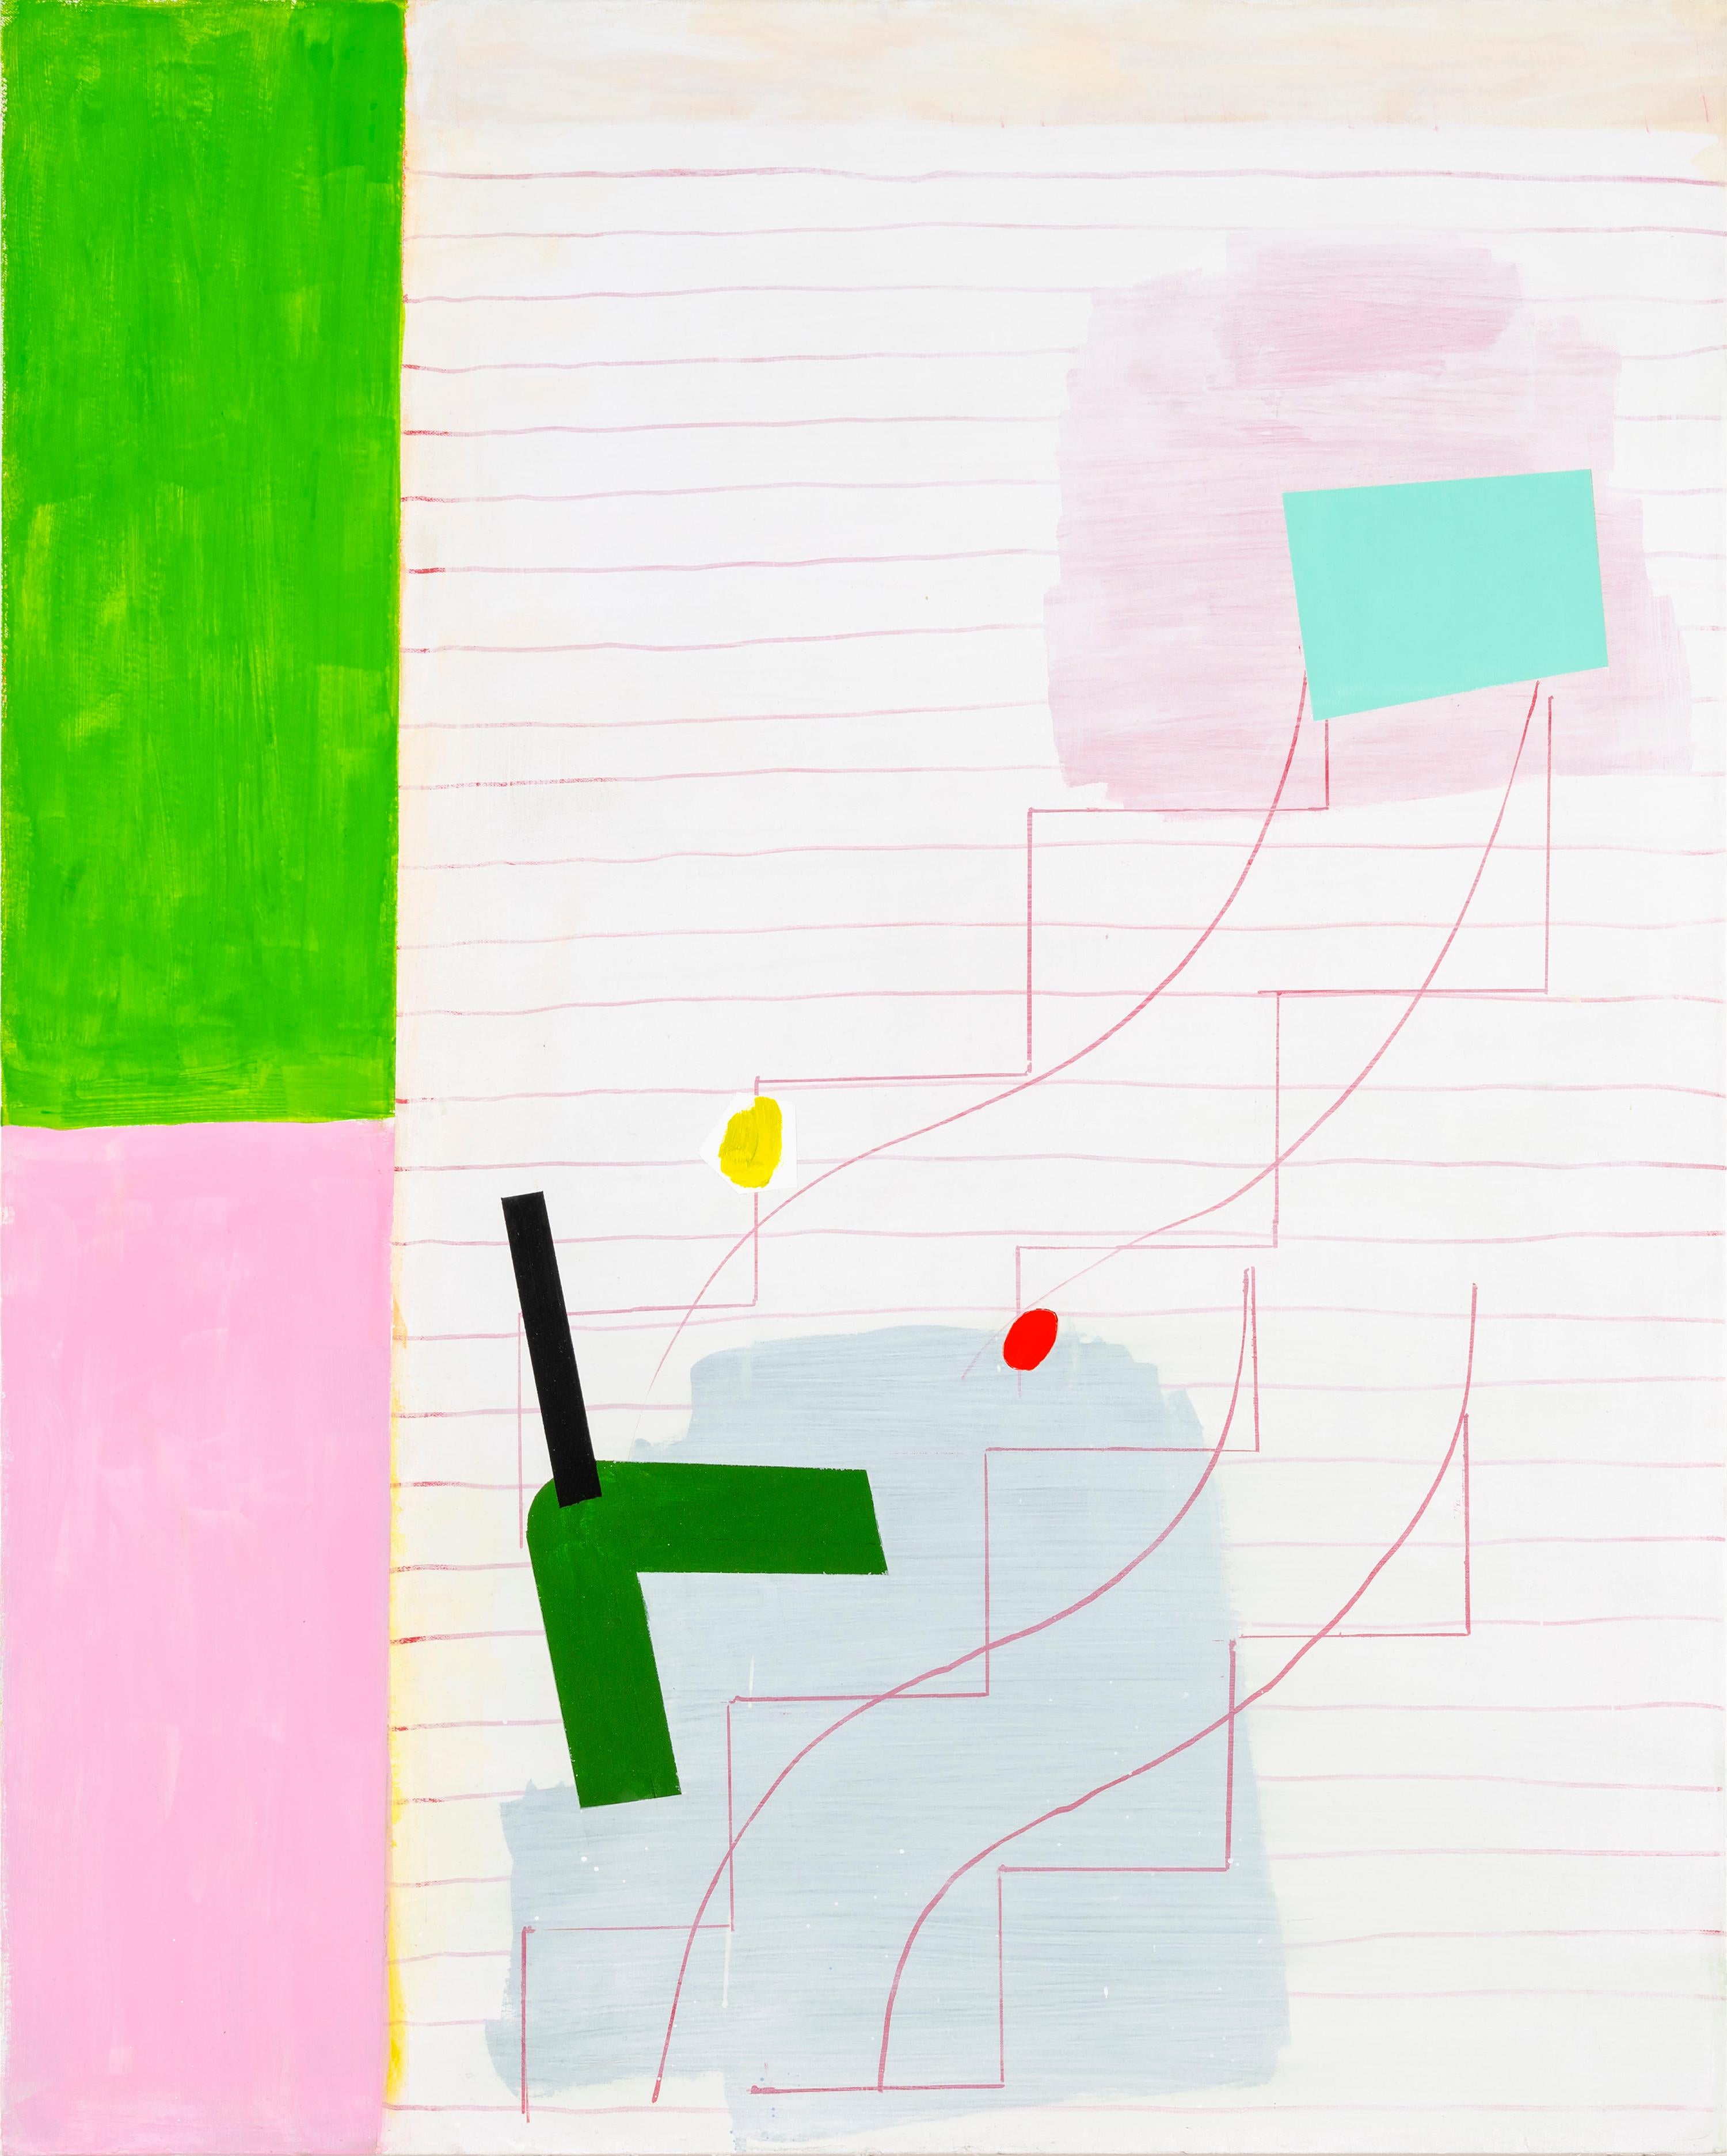 Margo Margolis Abstract Painting - "Mapping the Day" Playful/Sophisticated Abstract Calder/Matisse-Like Pink/ Green